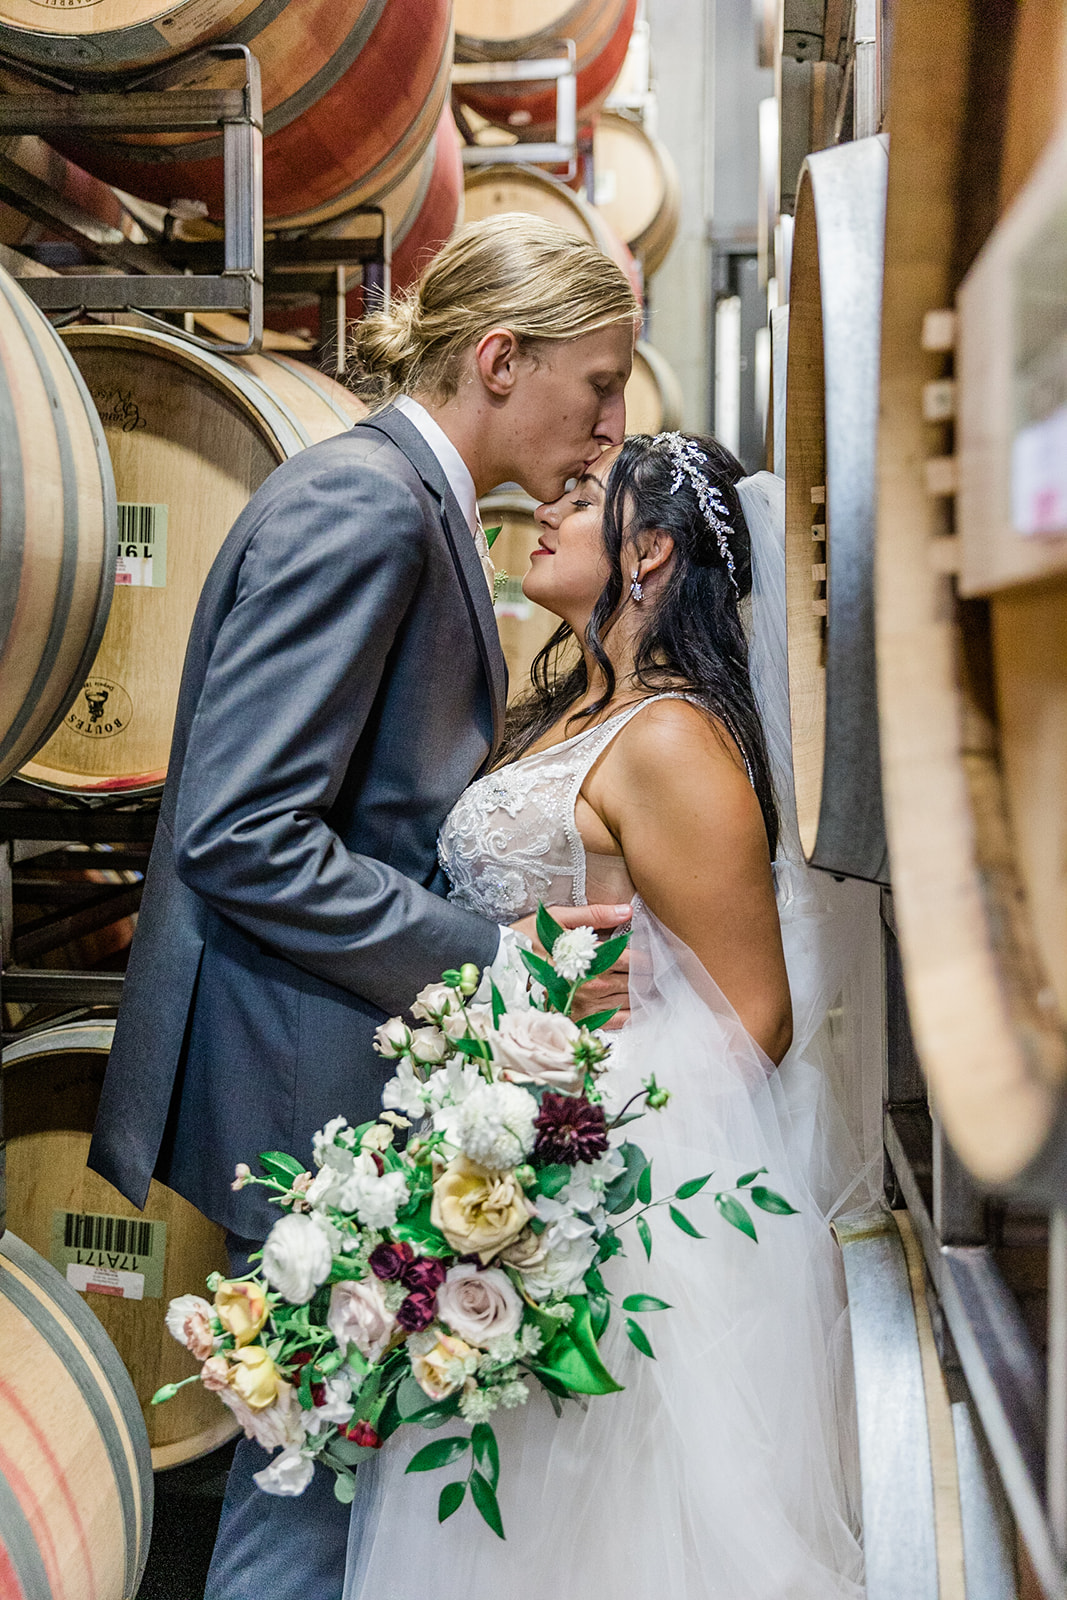 A romantic moment of the newly wedded couple in novelty hill wine barrel room